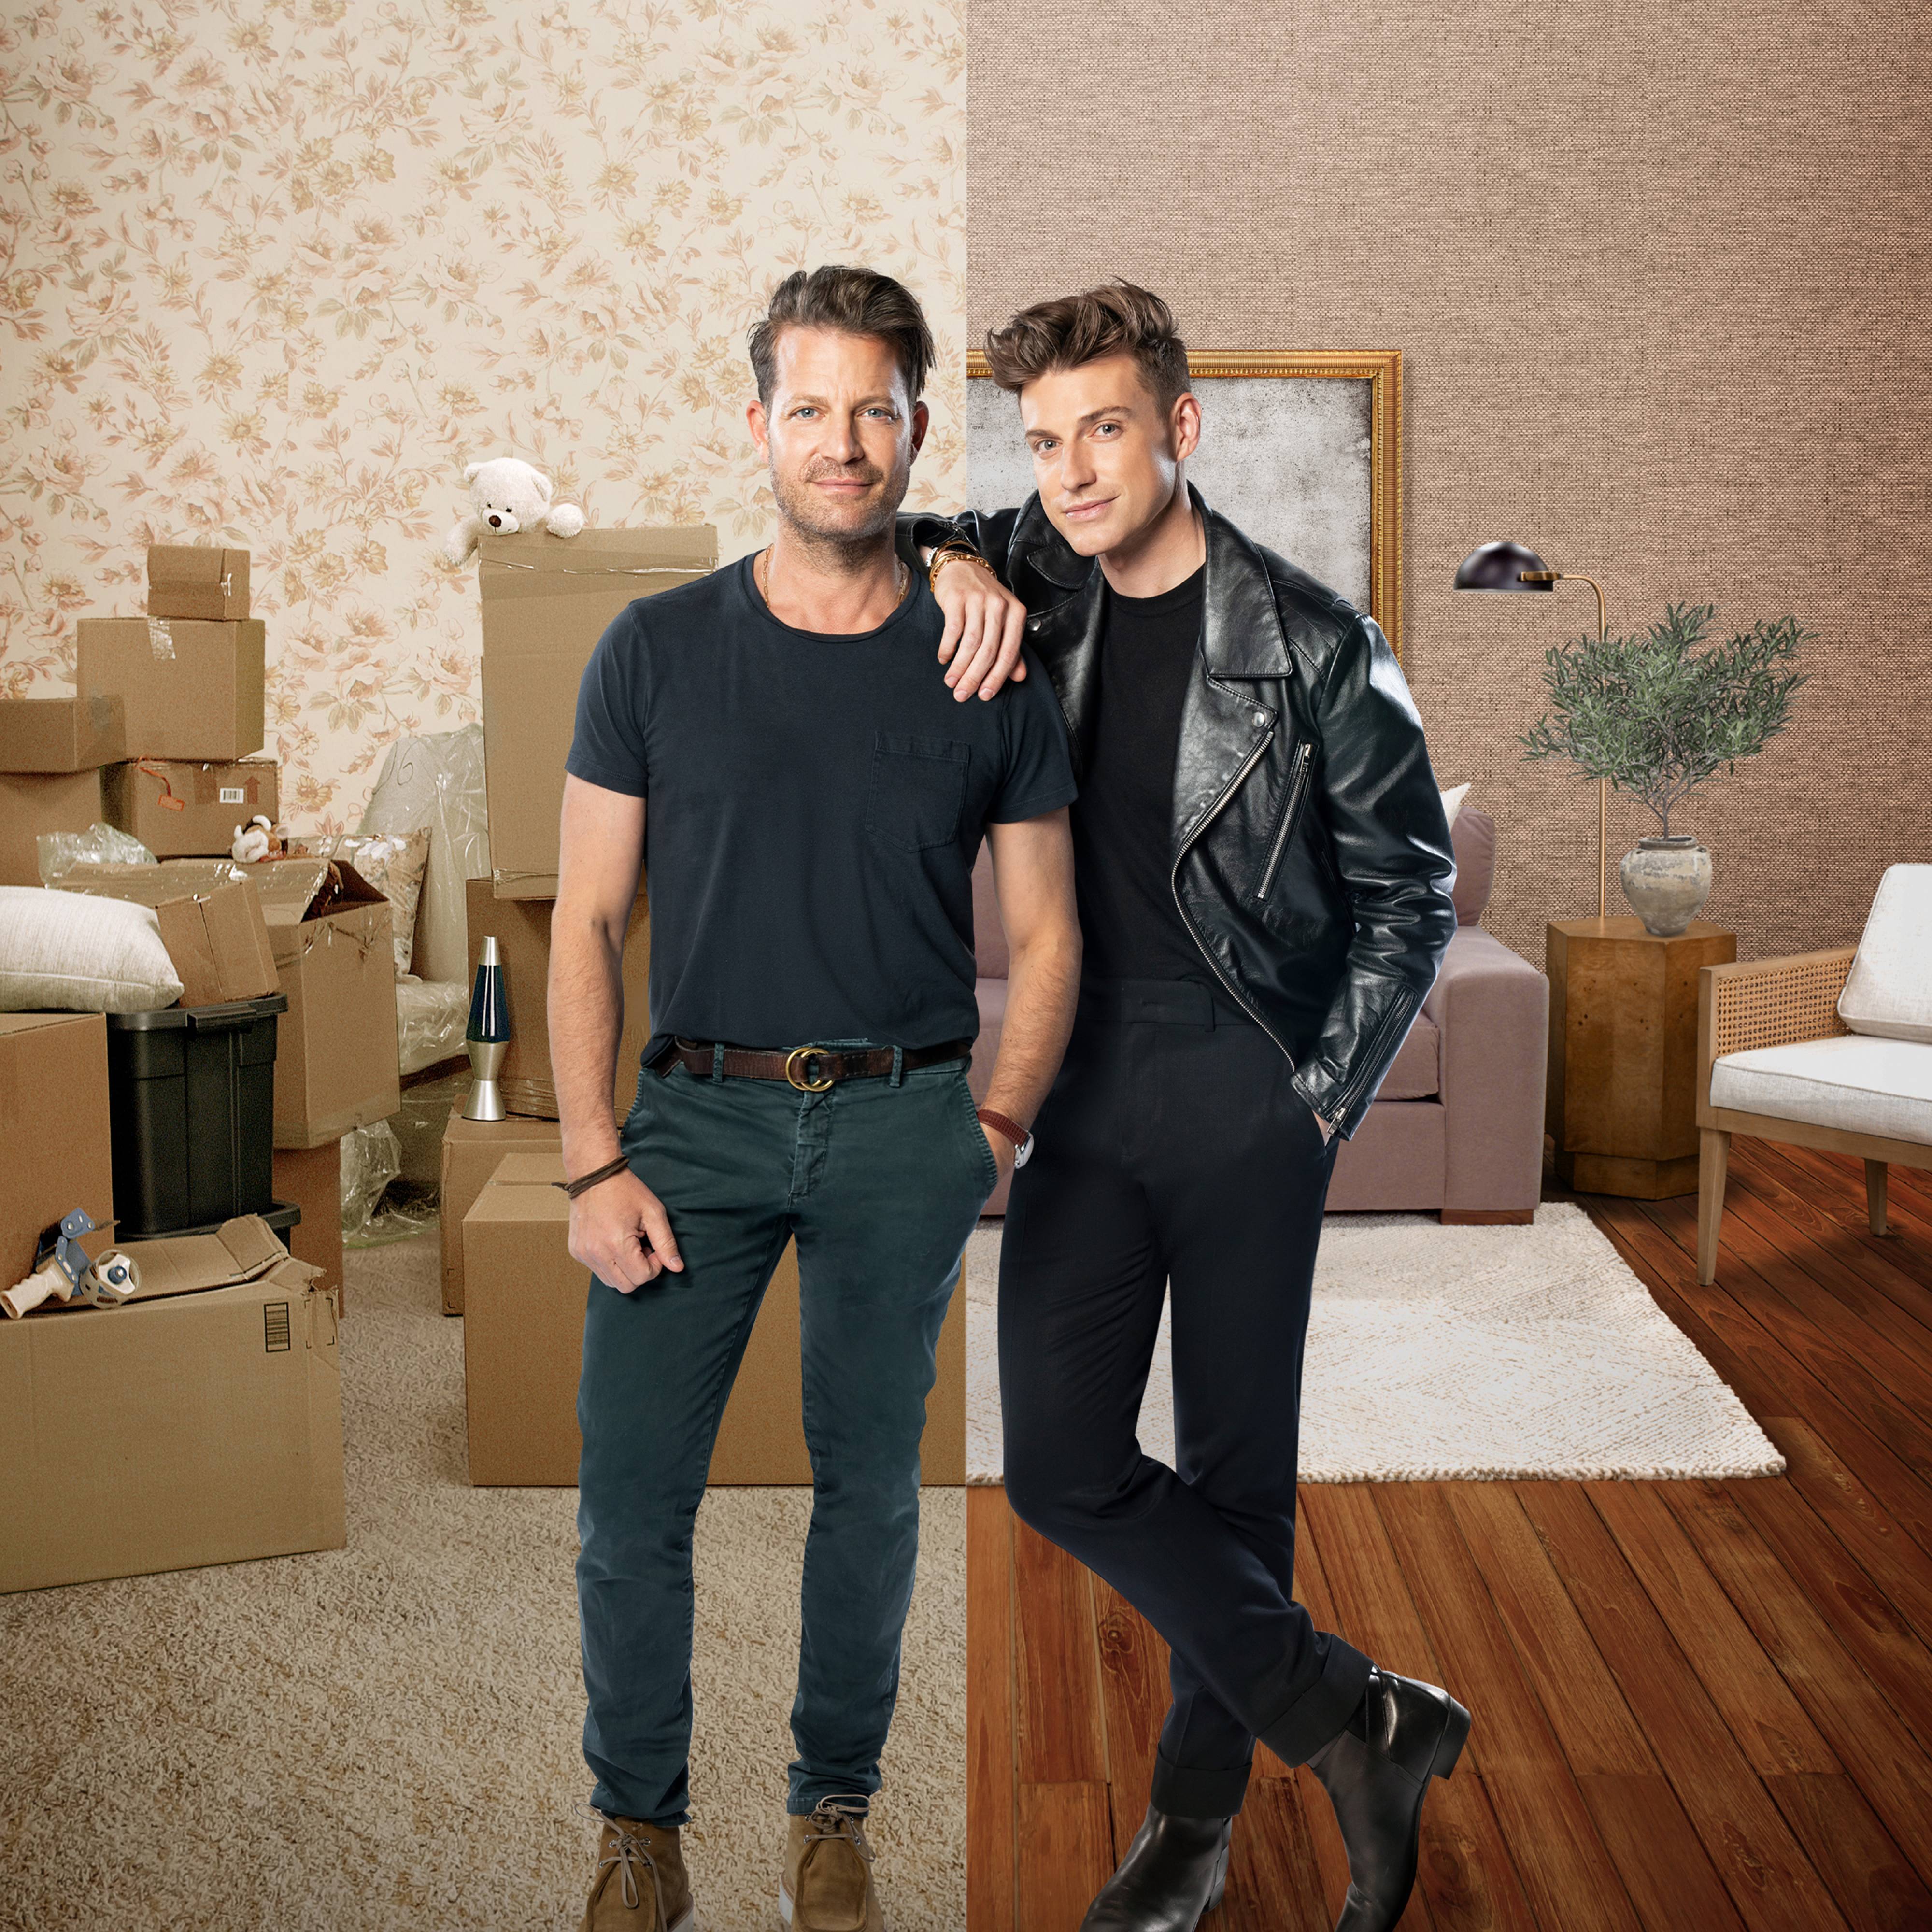 Stream The Nate and Jeremiah Home Project discovery+